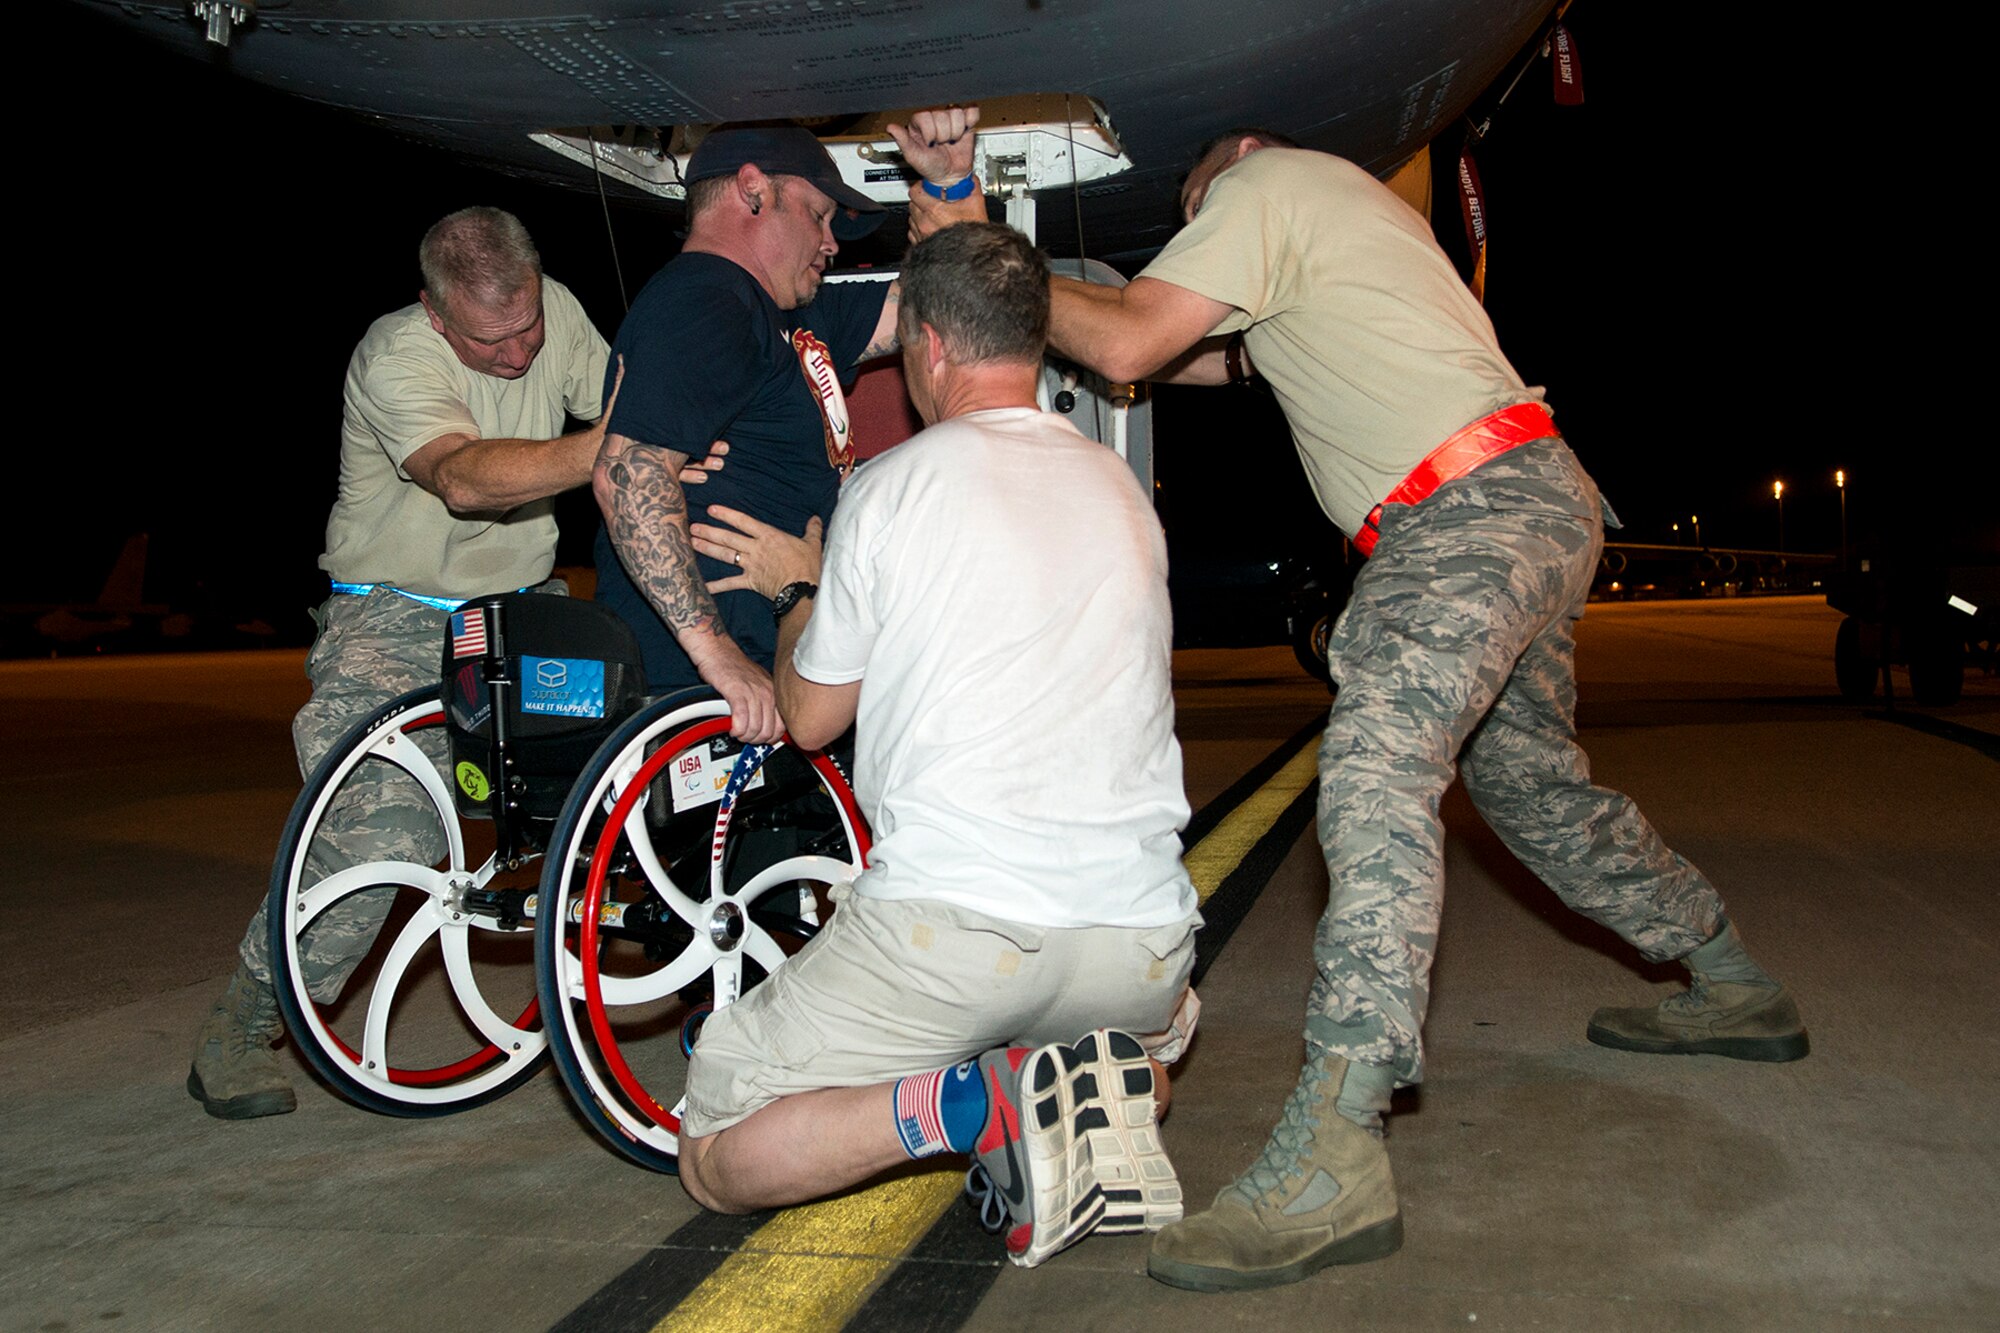 Patrick McDonald is helped down out of the cockpit of a 307th Bomb Wing B-52H Stratofortress during his visit to Barksdale Air Force Base, La., June 3, 2014. McDonald, a U.S. Army veteran, was paralyzed in 1991 as the result of an accident while serving with the Army in South Korea, joined the American300 Tours to share his experience with fellow military service members as part of the tour's 'Never Quit Series'. (U.S. Air Force photo by Master Sgt. Greg Steele/Released)